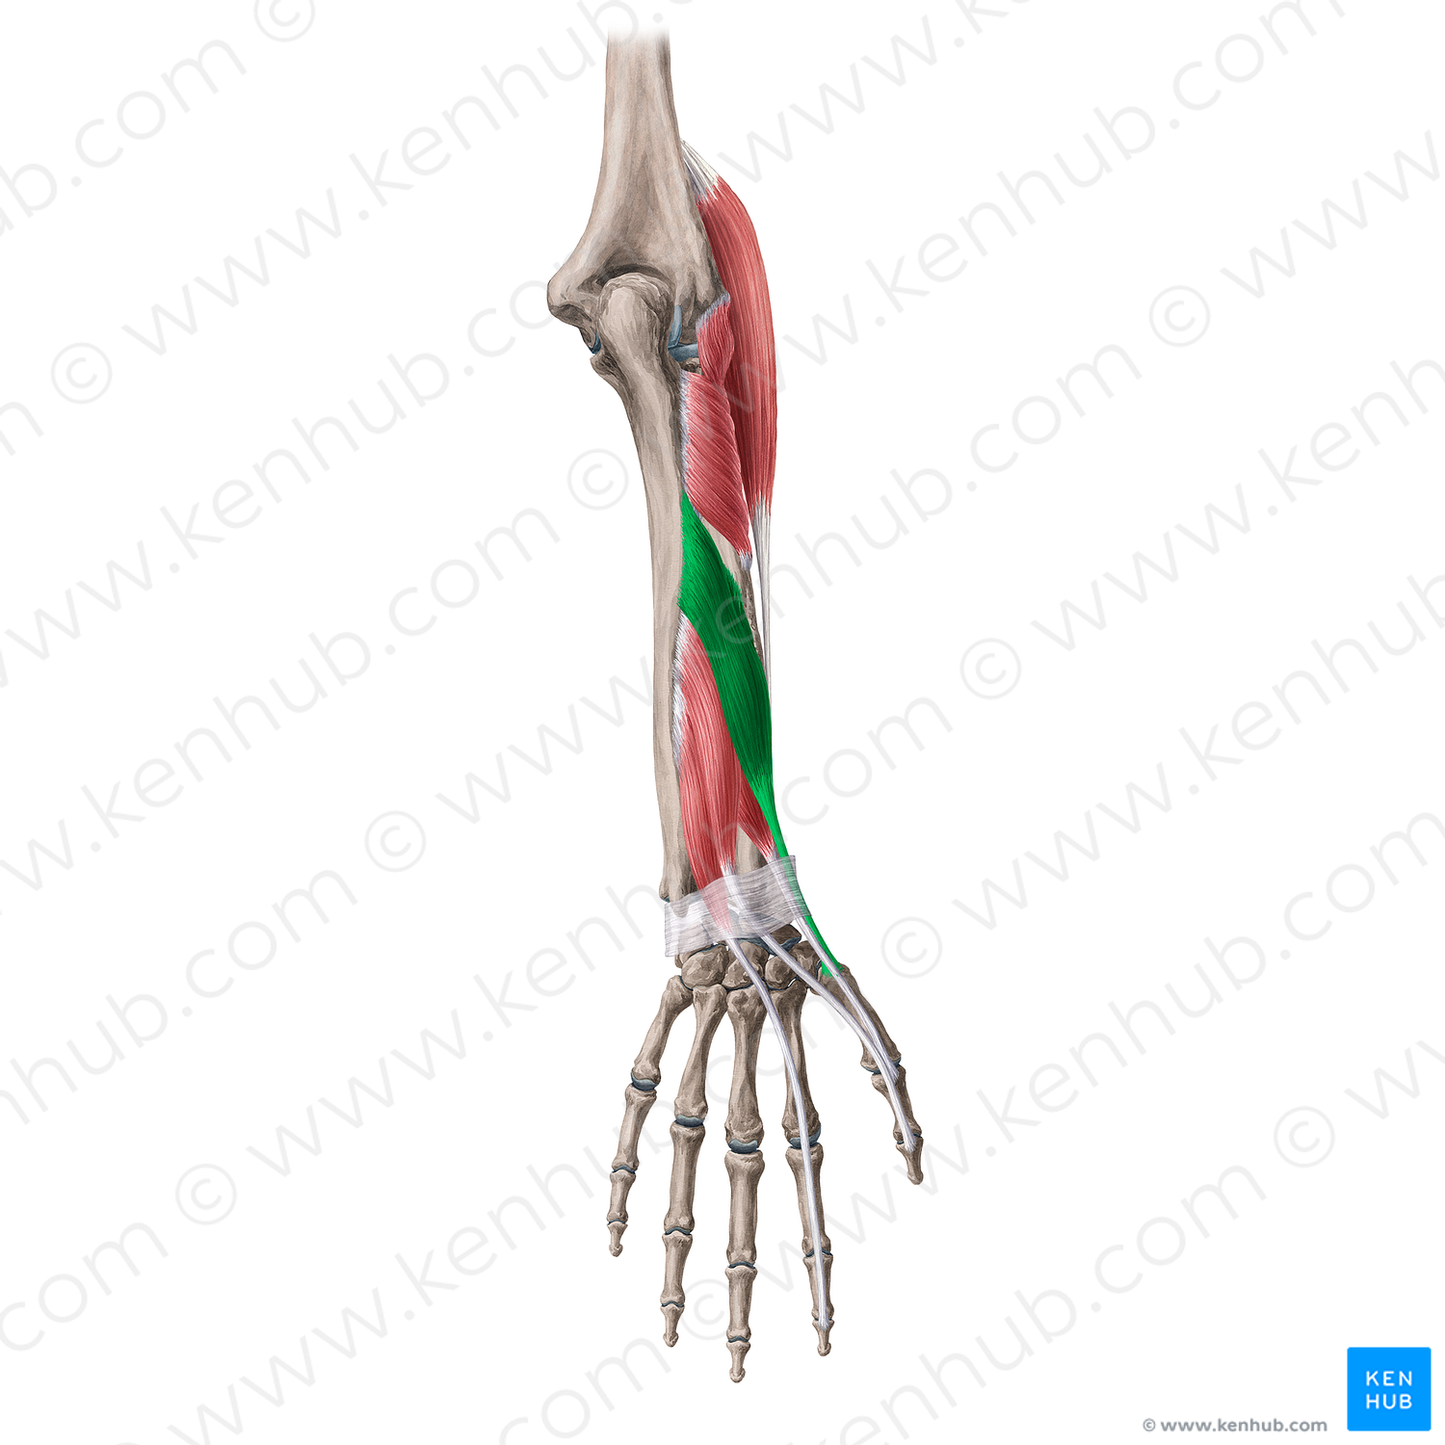 Abductor pollicis longus muscle (#20066)